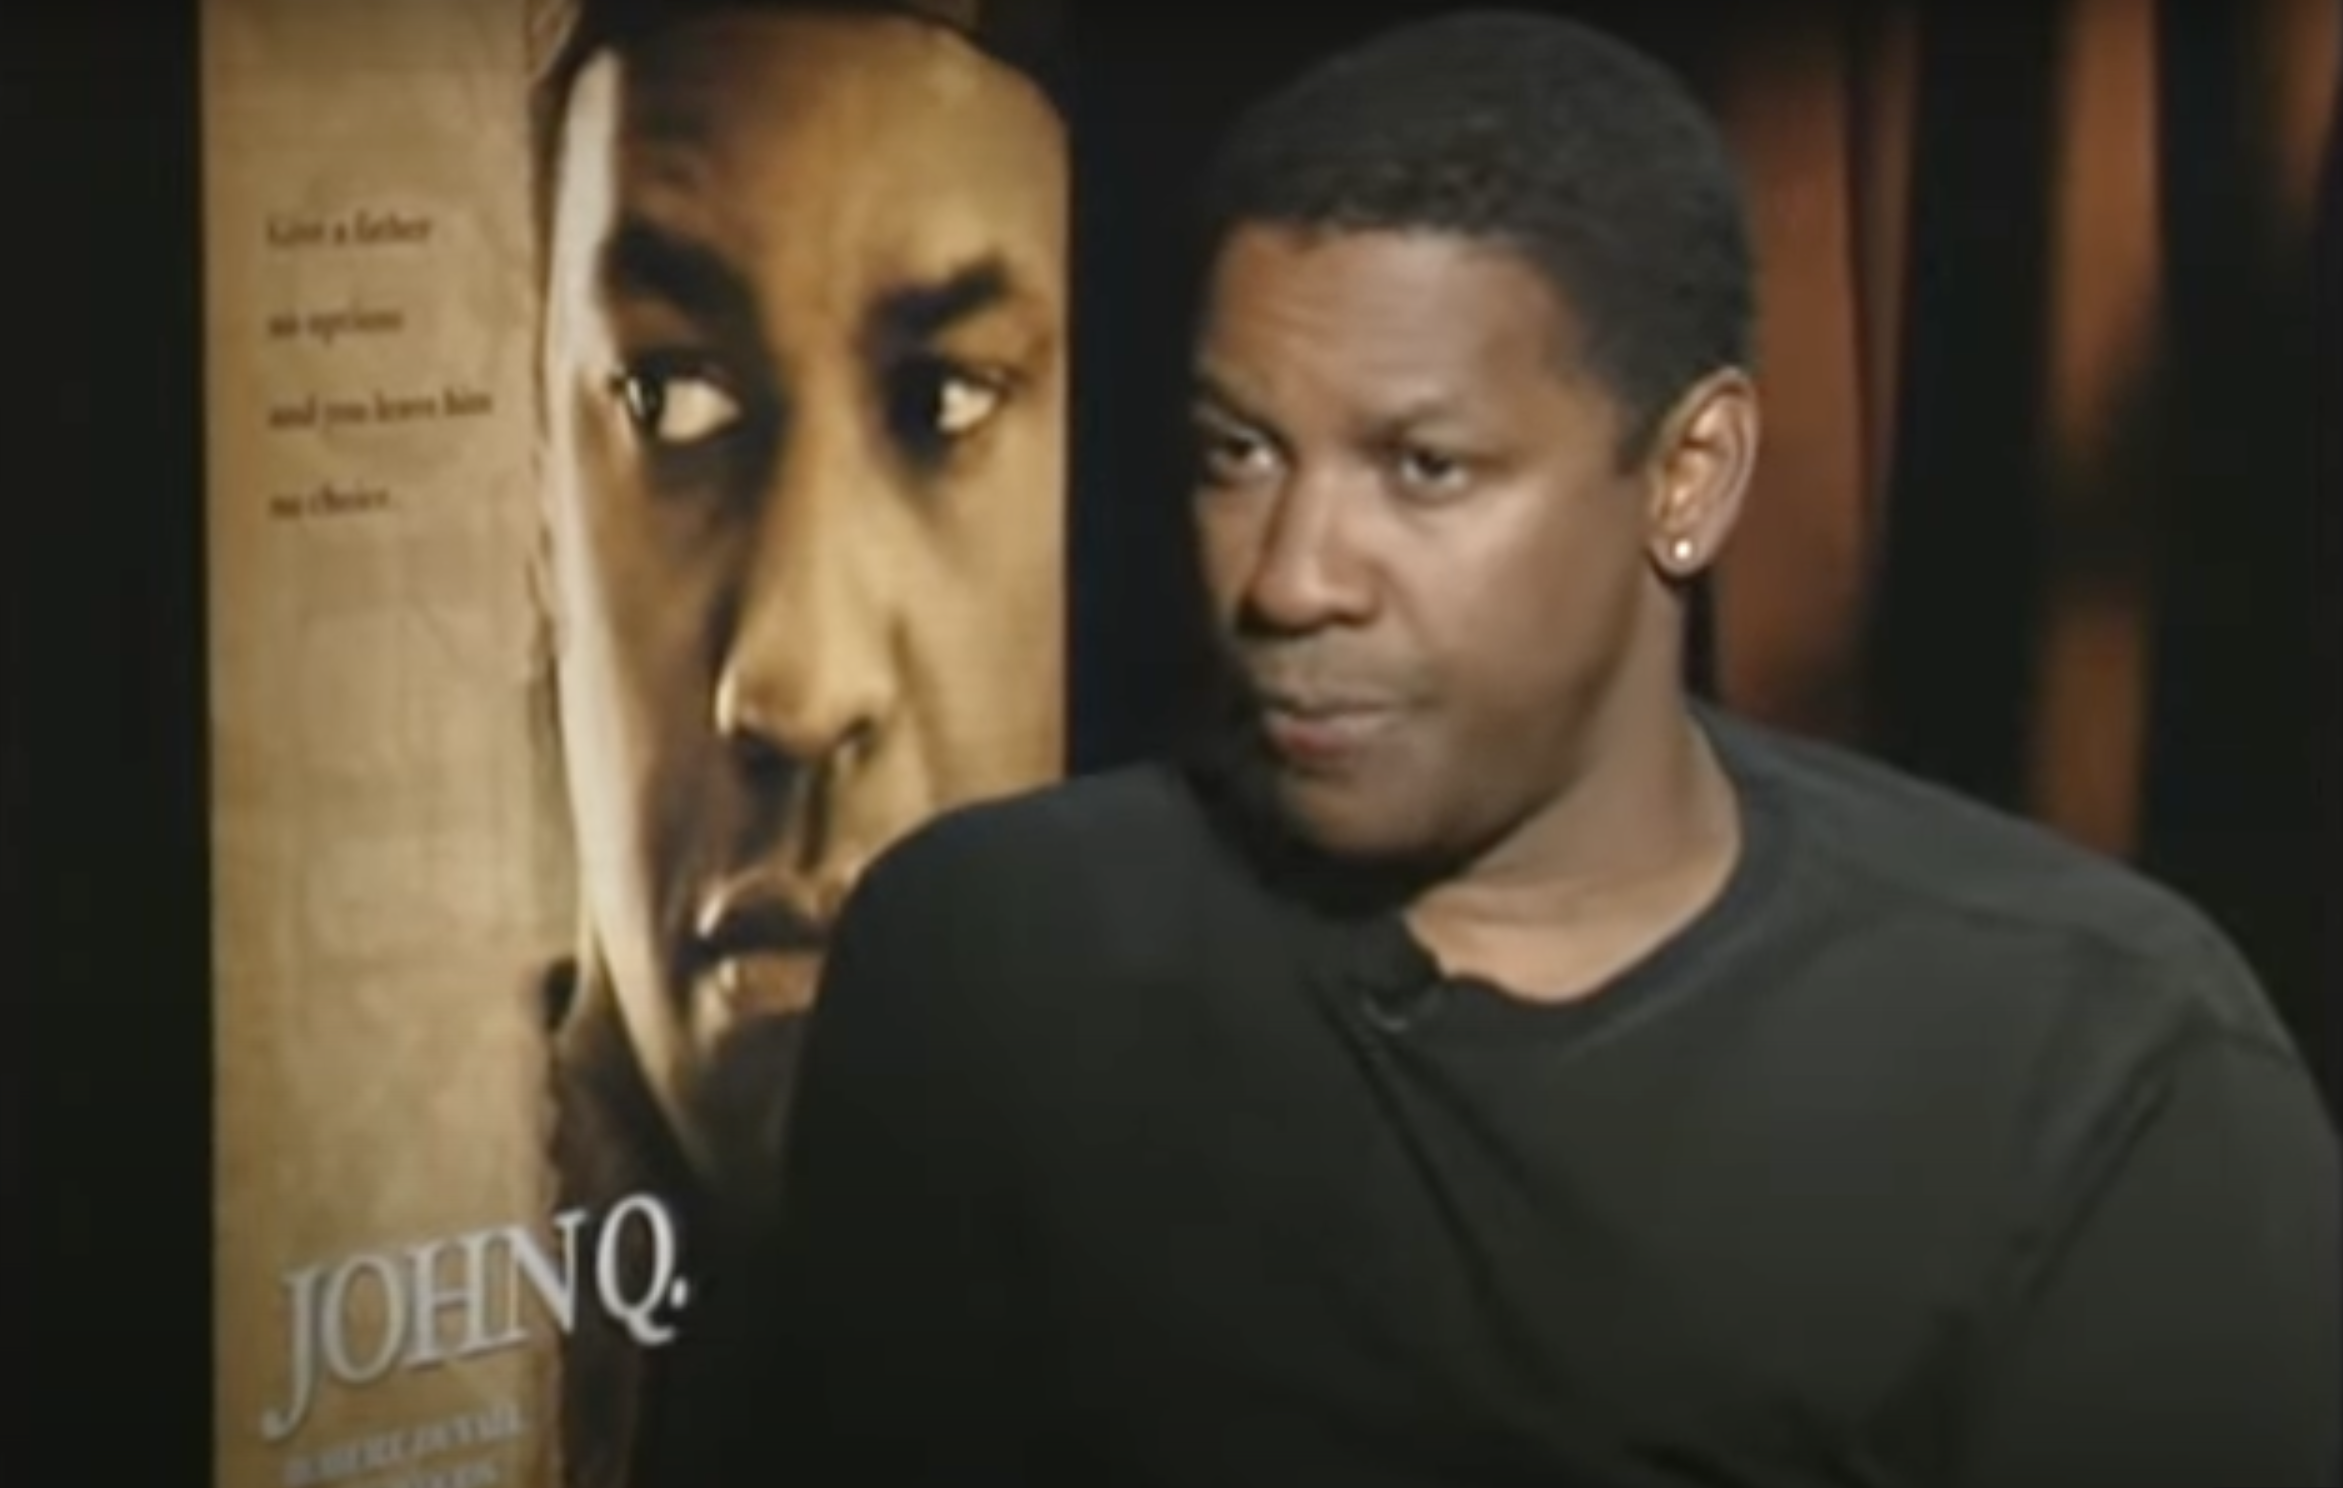 Rachael Fedder of Hollywood.com interviews Denzel Washington, Anne Heche, Kimberly Elise, and Nick Cassavetes in 2002. Photo Credit: Hollywood Archives Youtube